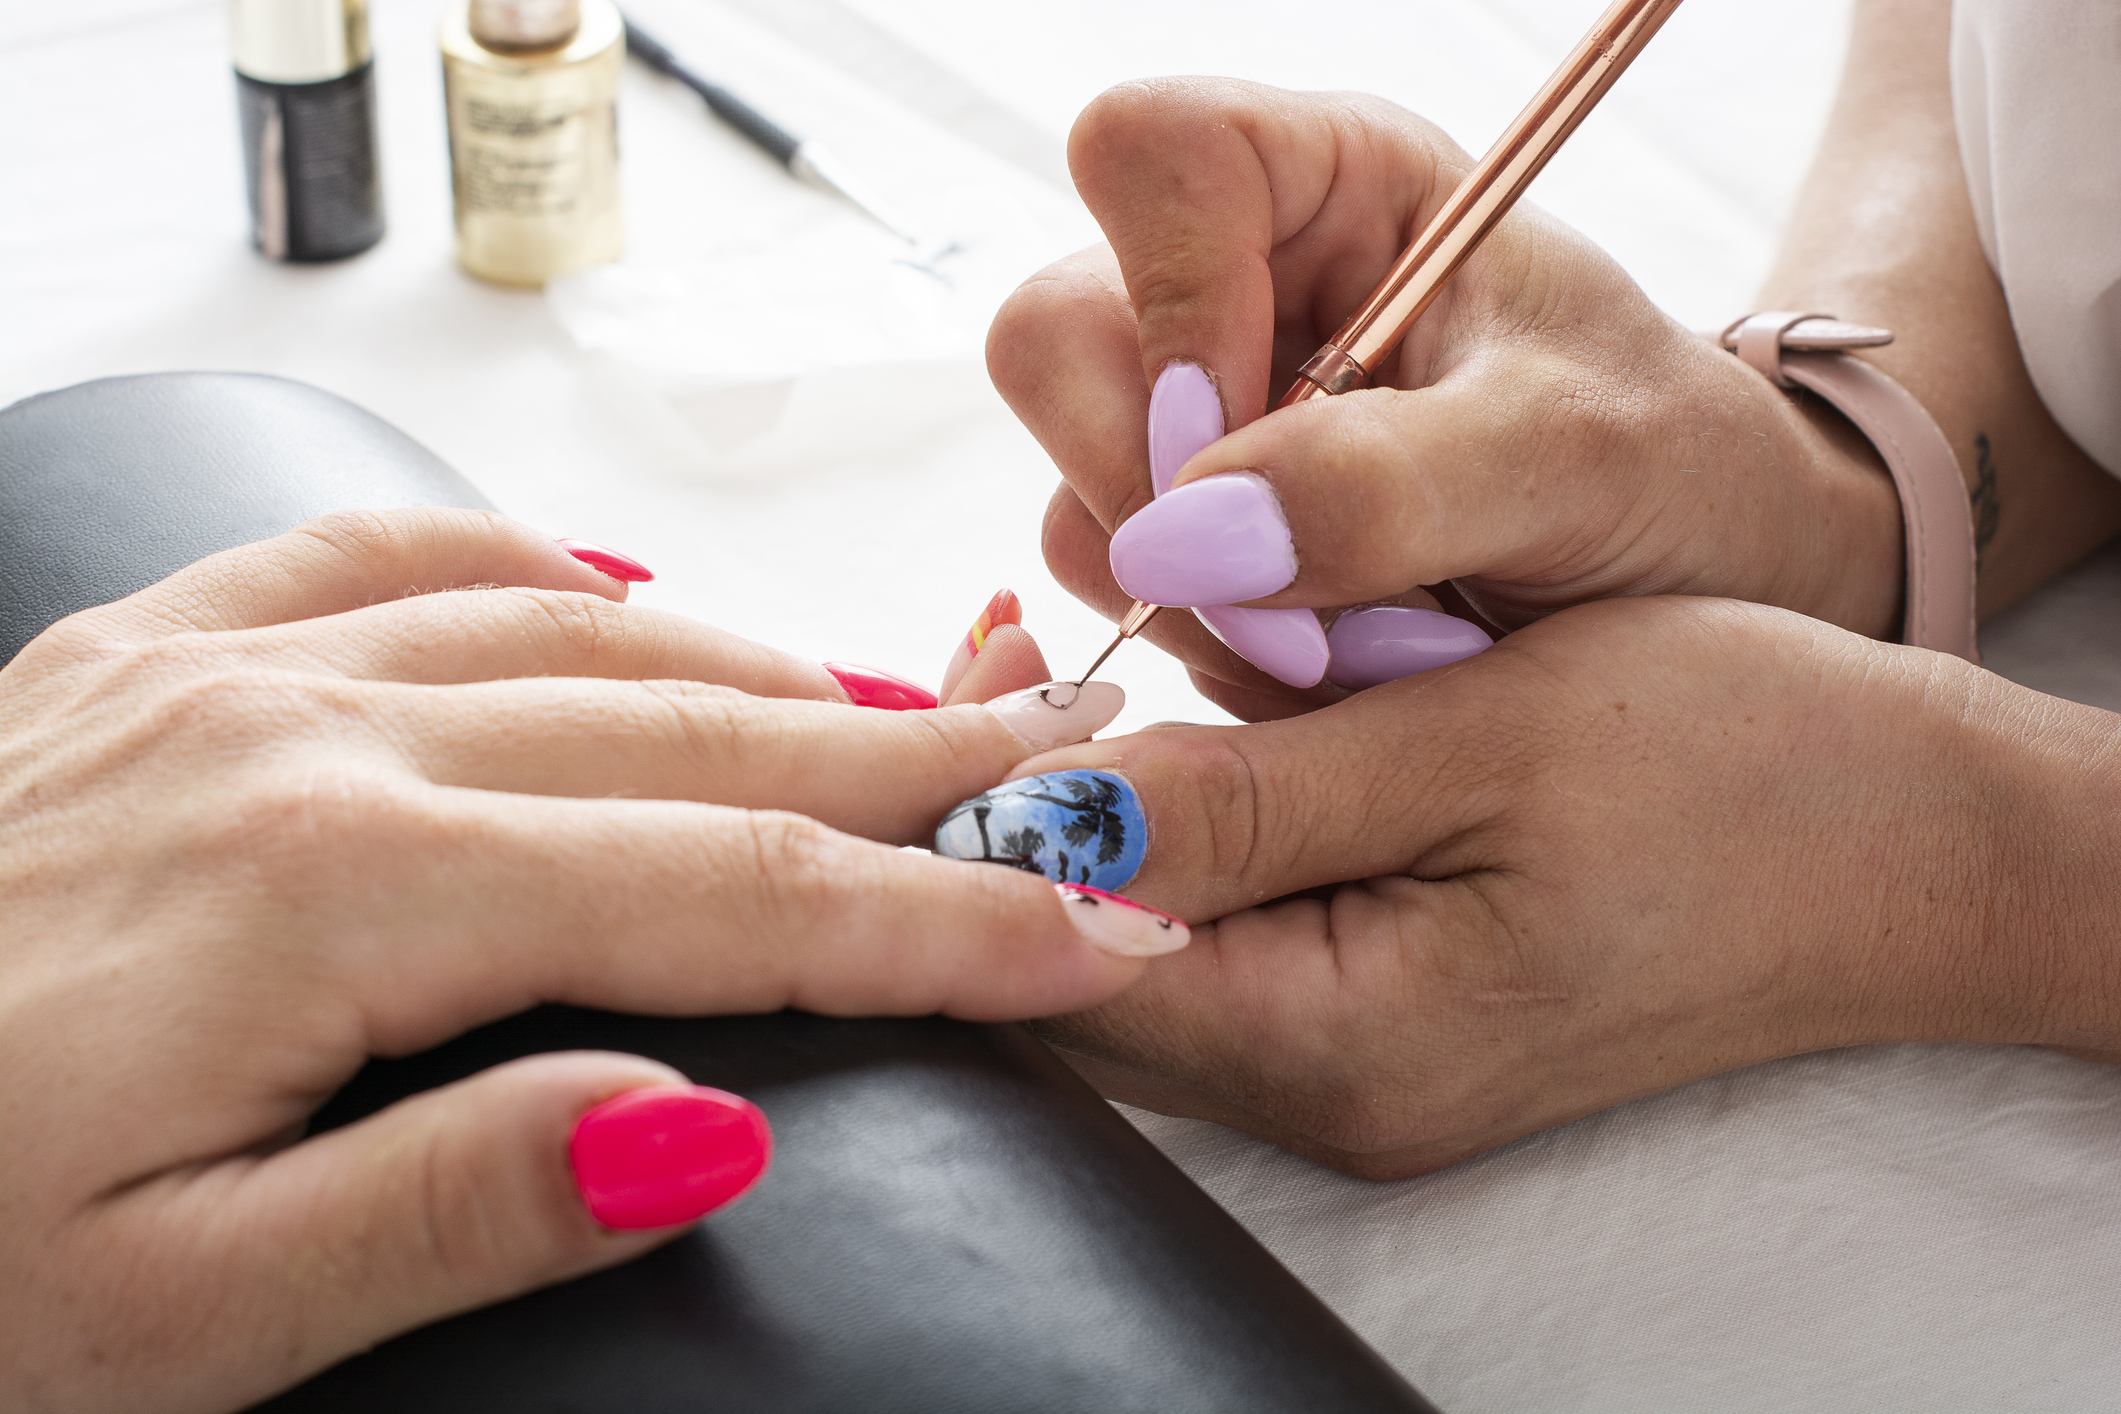 Woman getting her nails done in salon by manicure worker